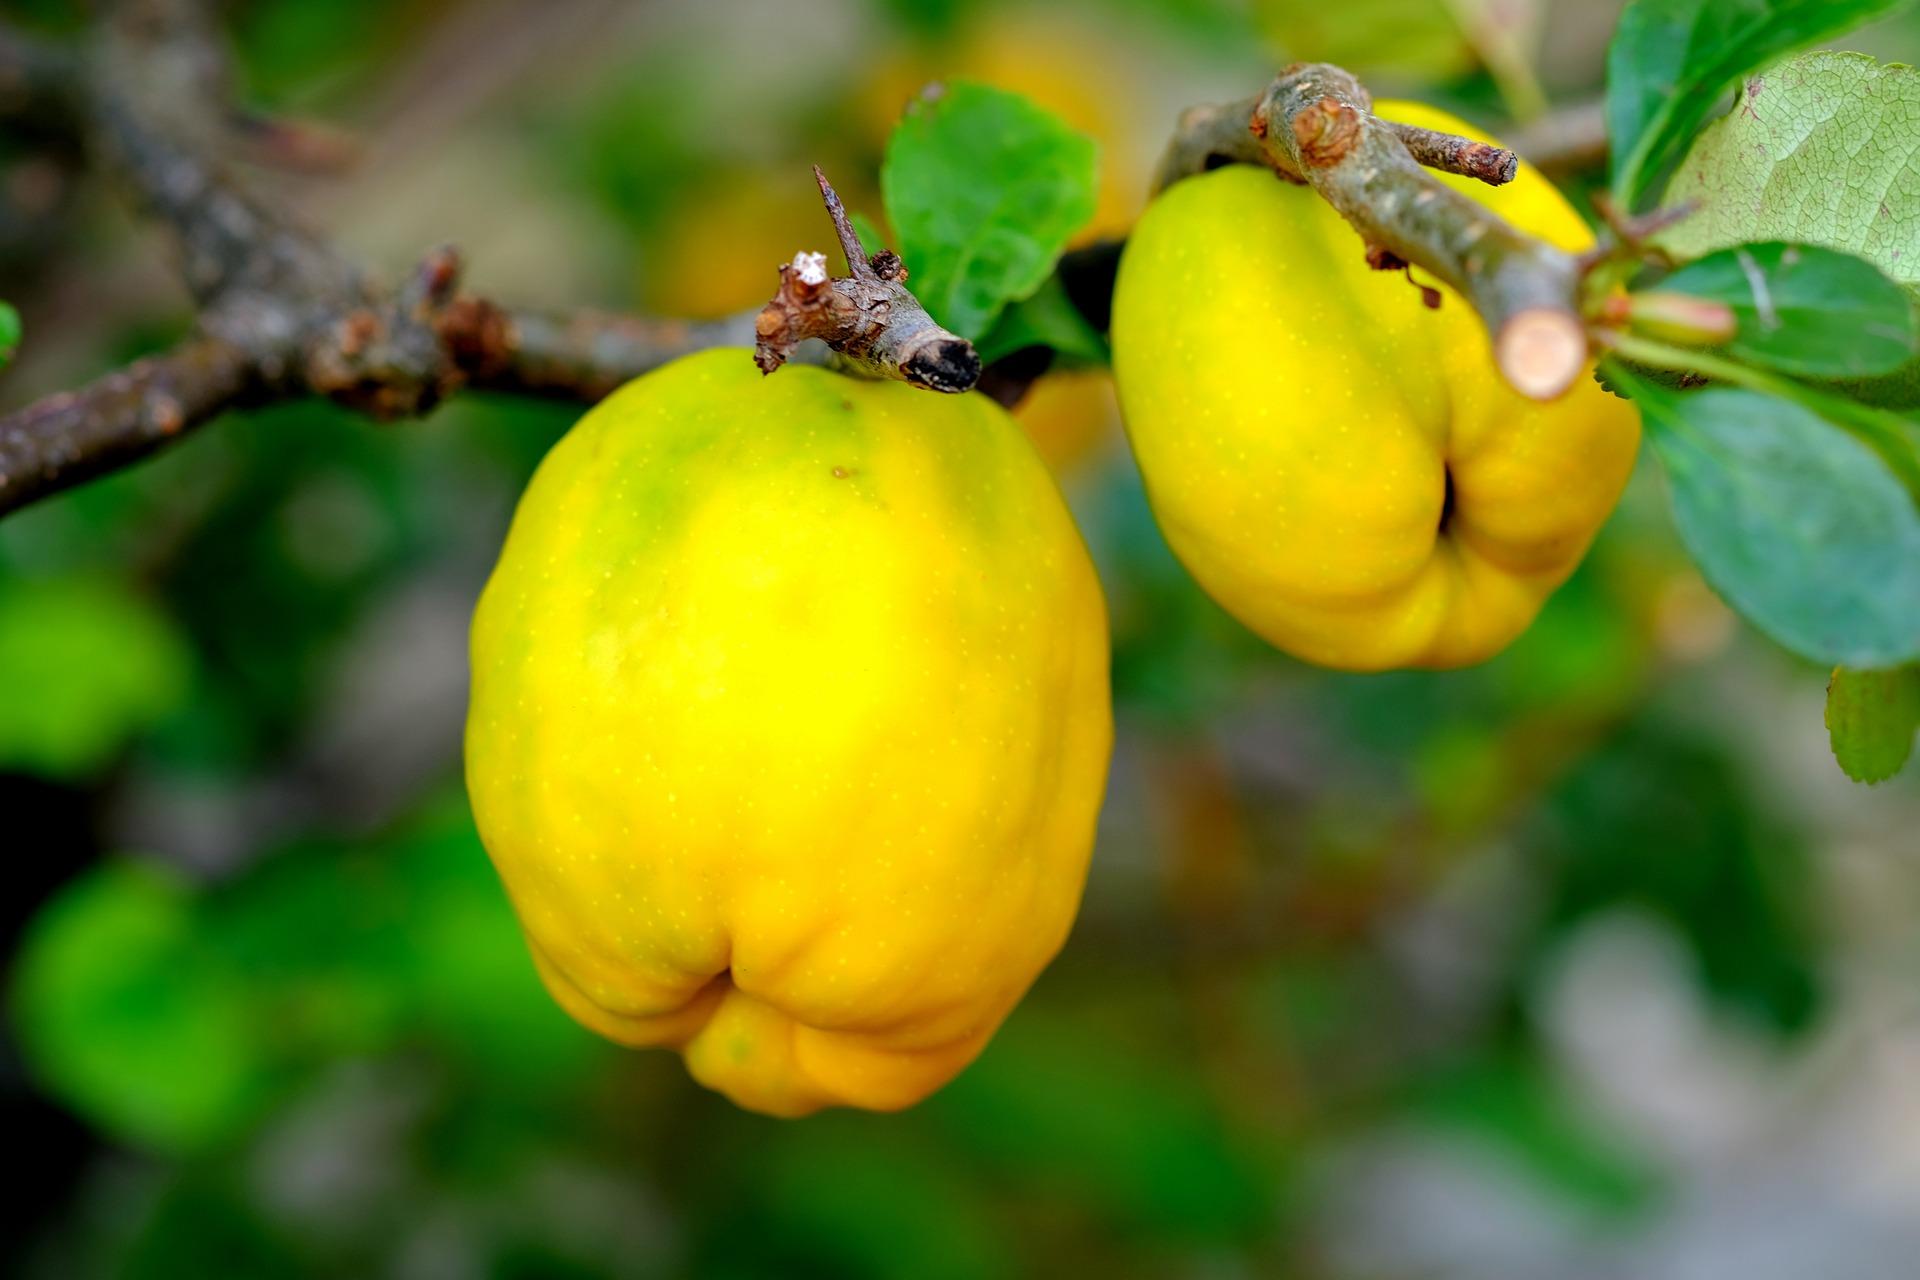 uploads/images/Ornamental Quince 2684072_1920